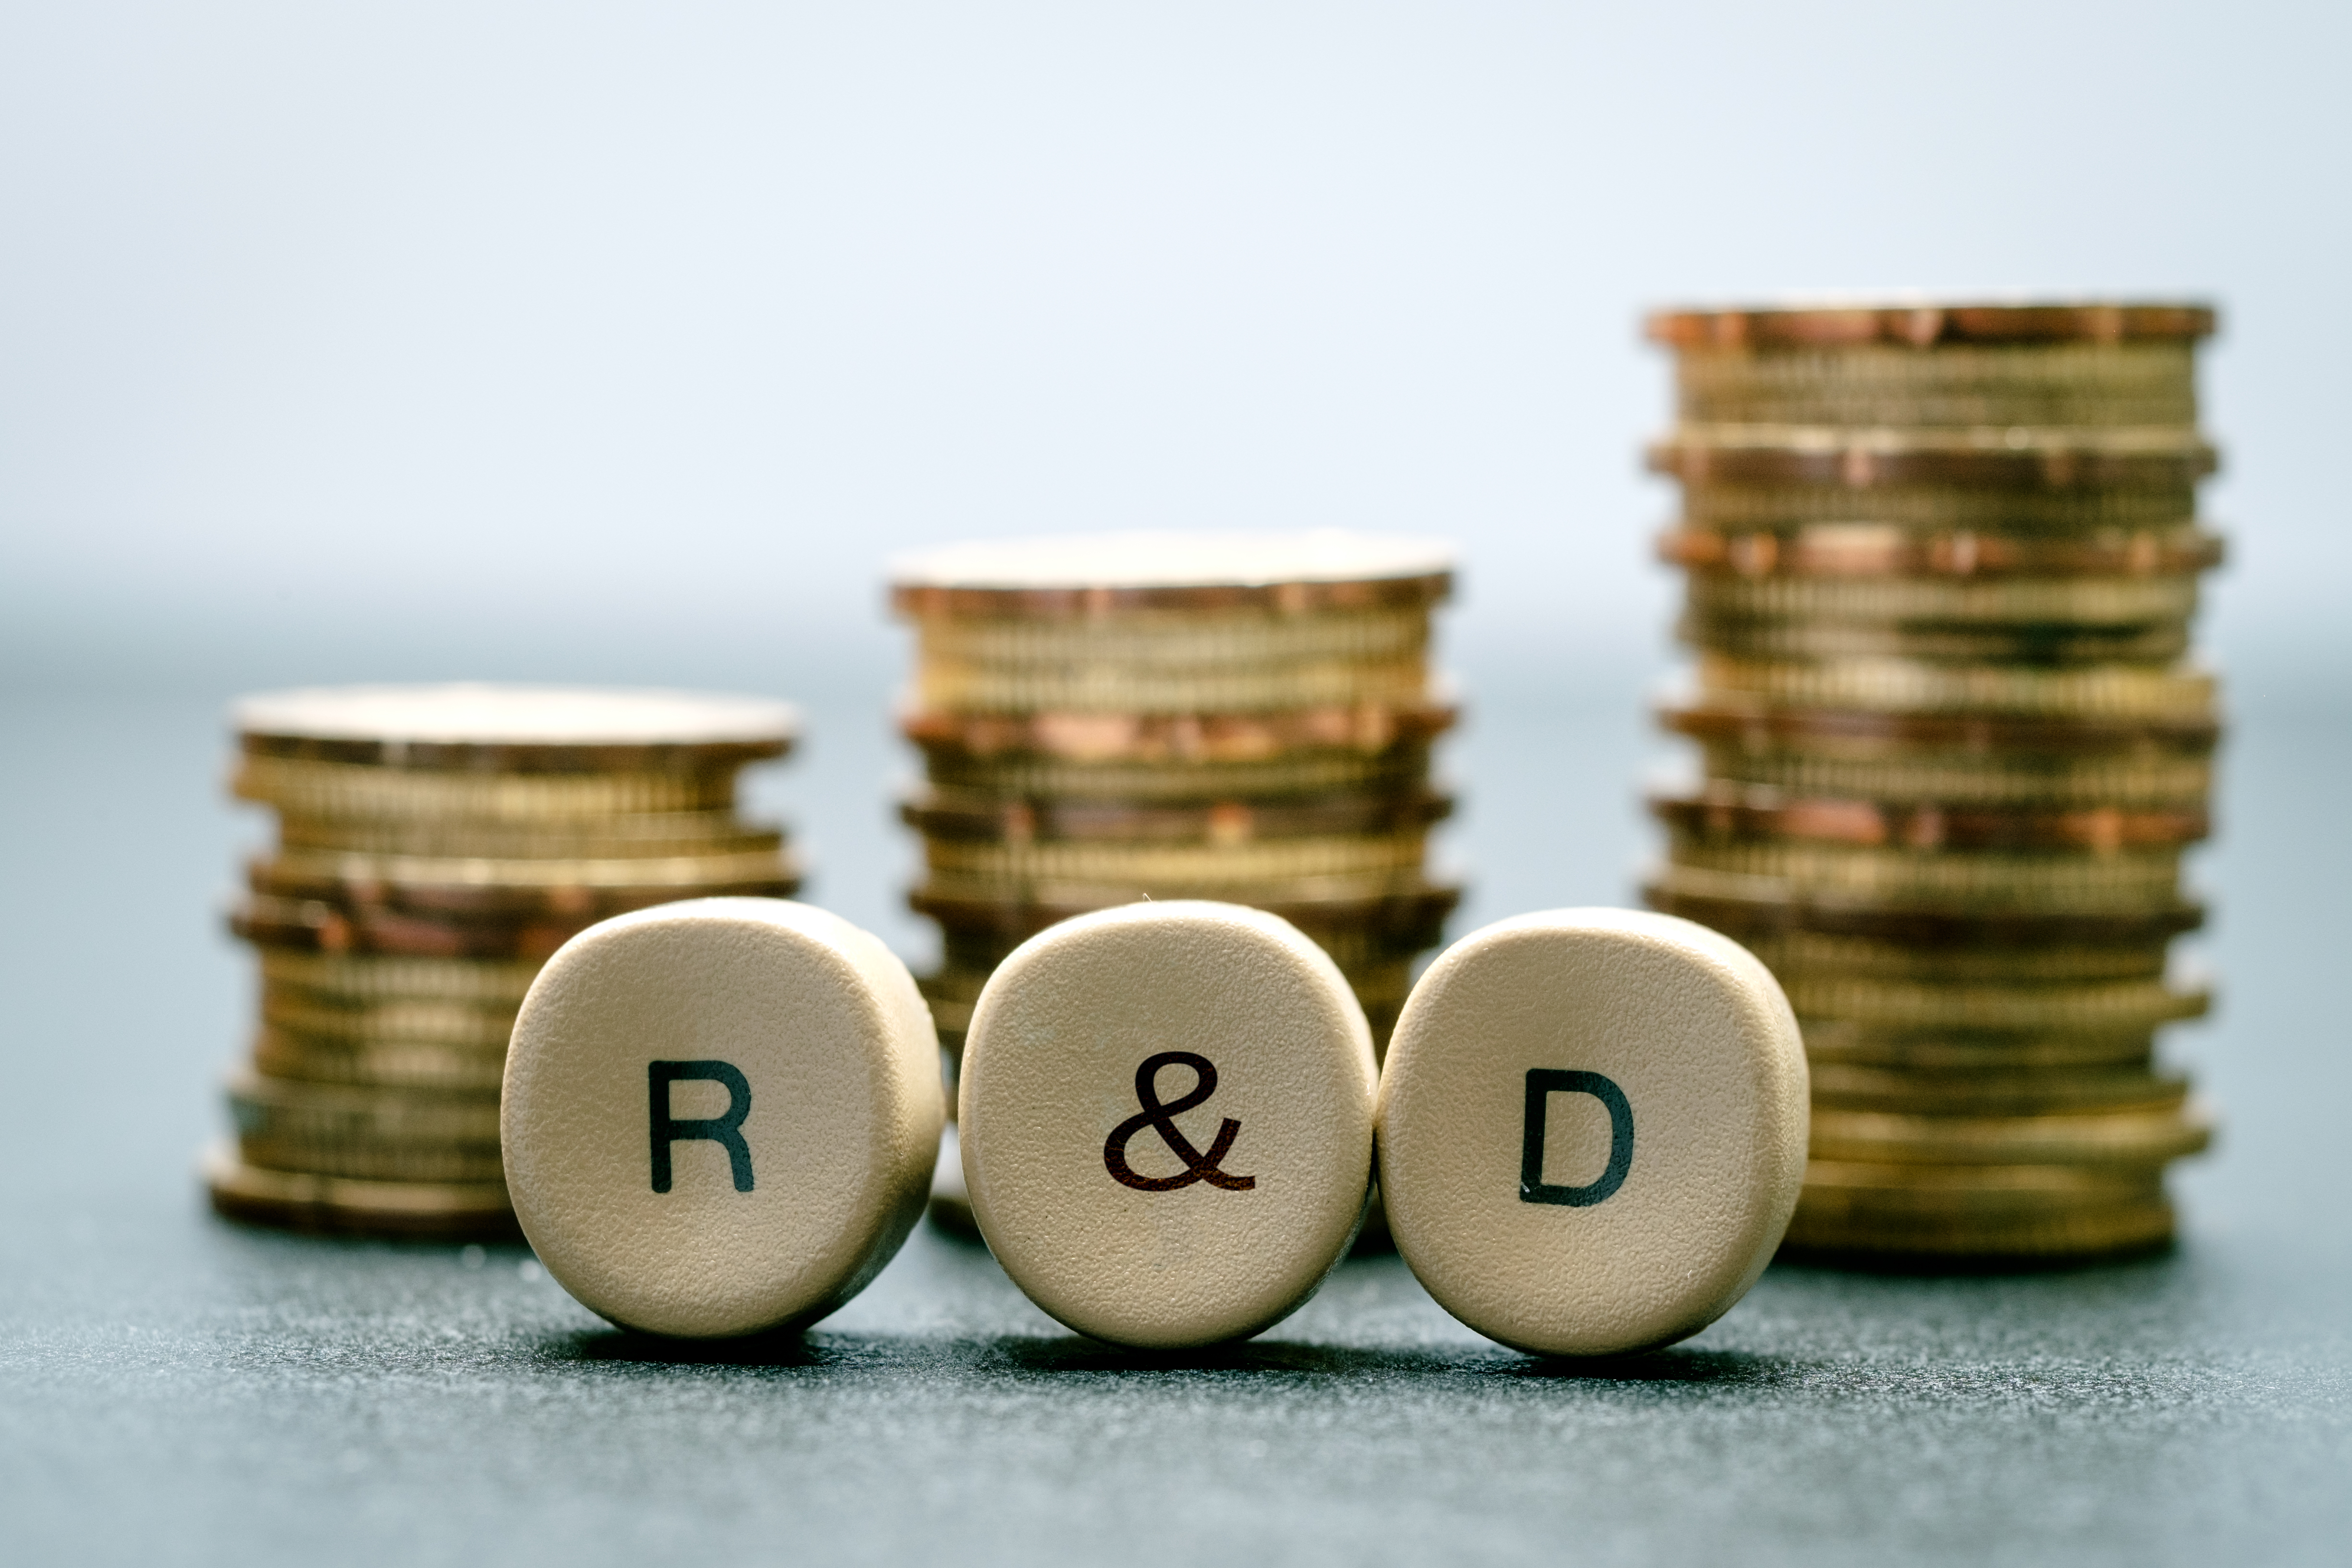 How to Use the R&D Credit as Non-Dilutive Funding